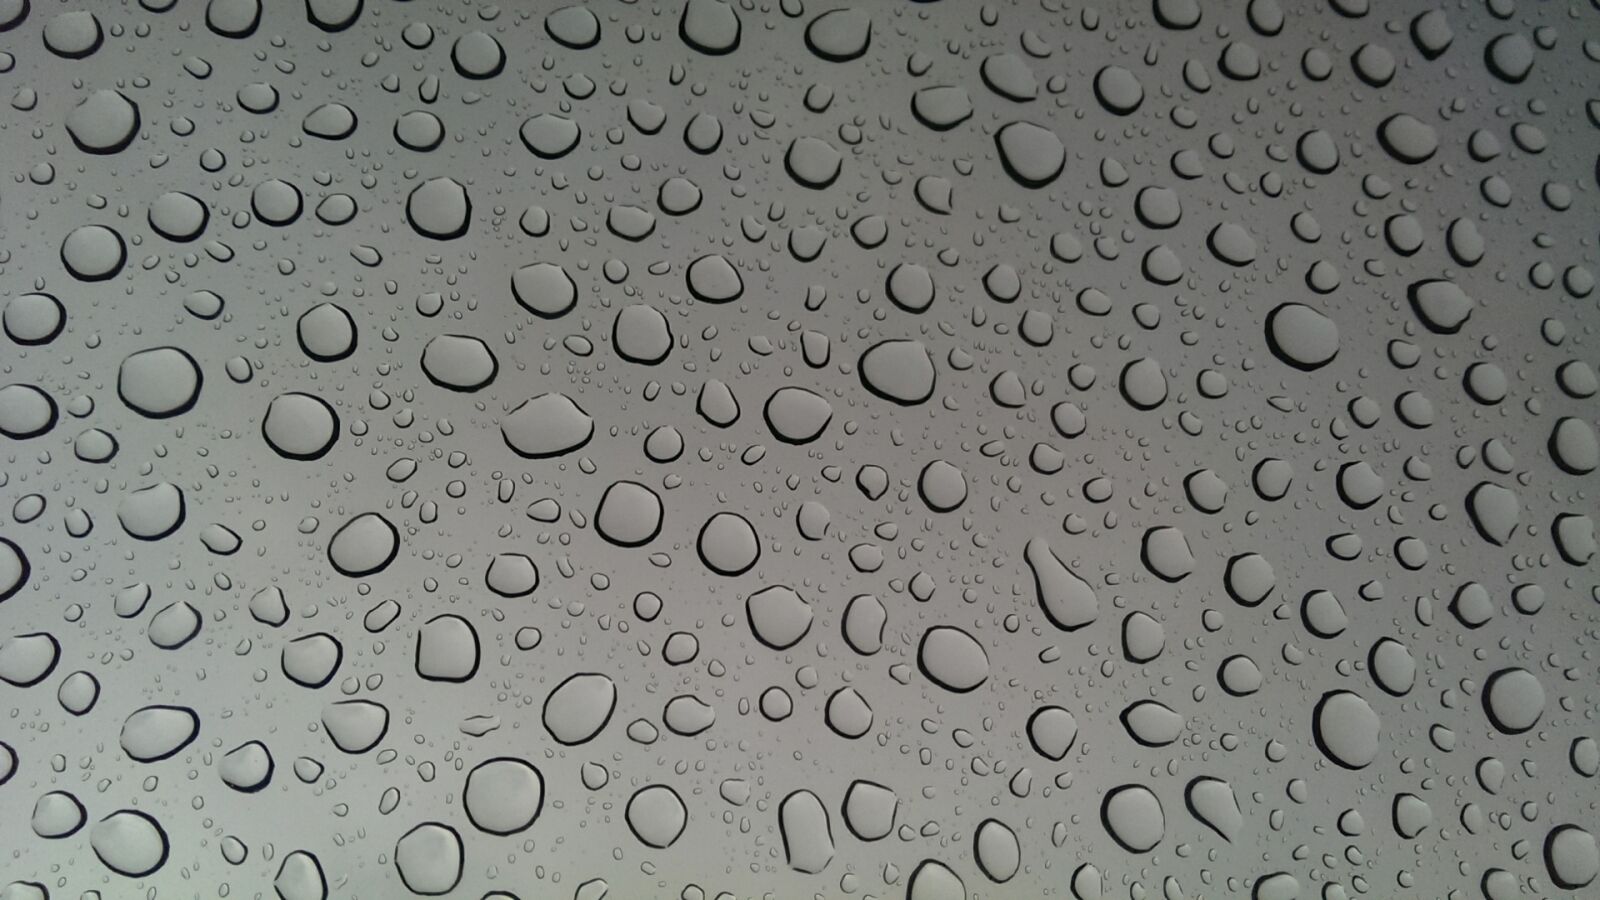 HTC ONE sample photo. Sunroof, drops, water photography